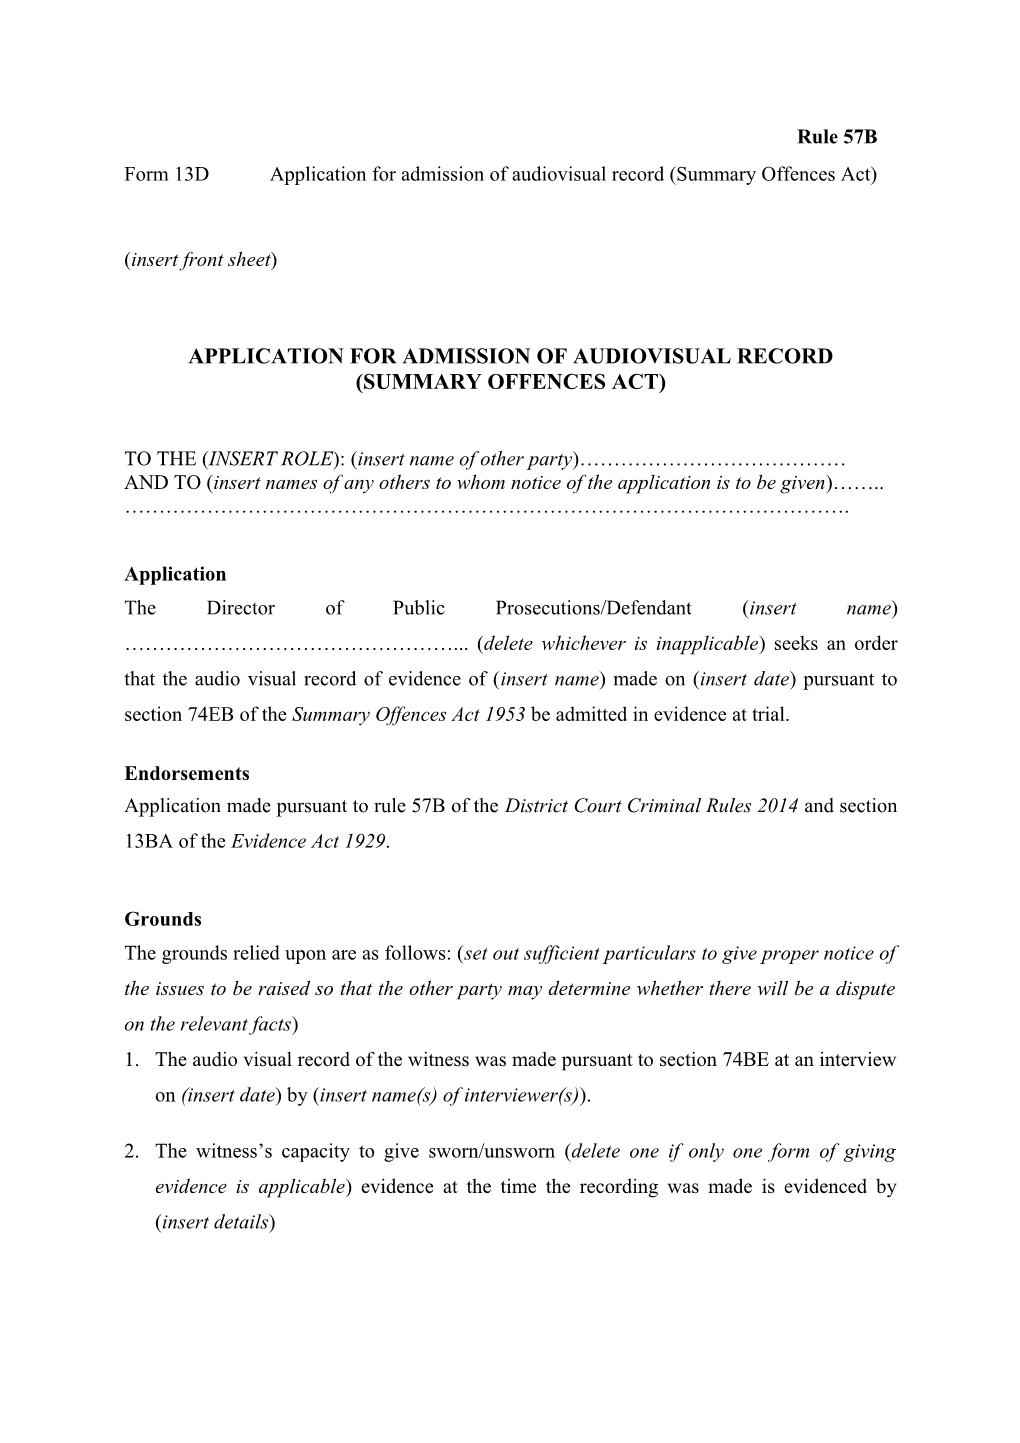 Form 13D - Application for Admission of Audiovisual Record (Summary Offences Act)